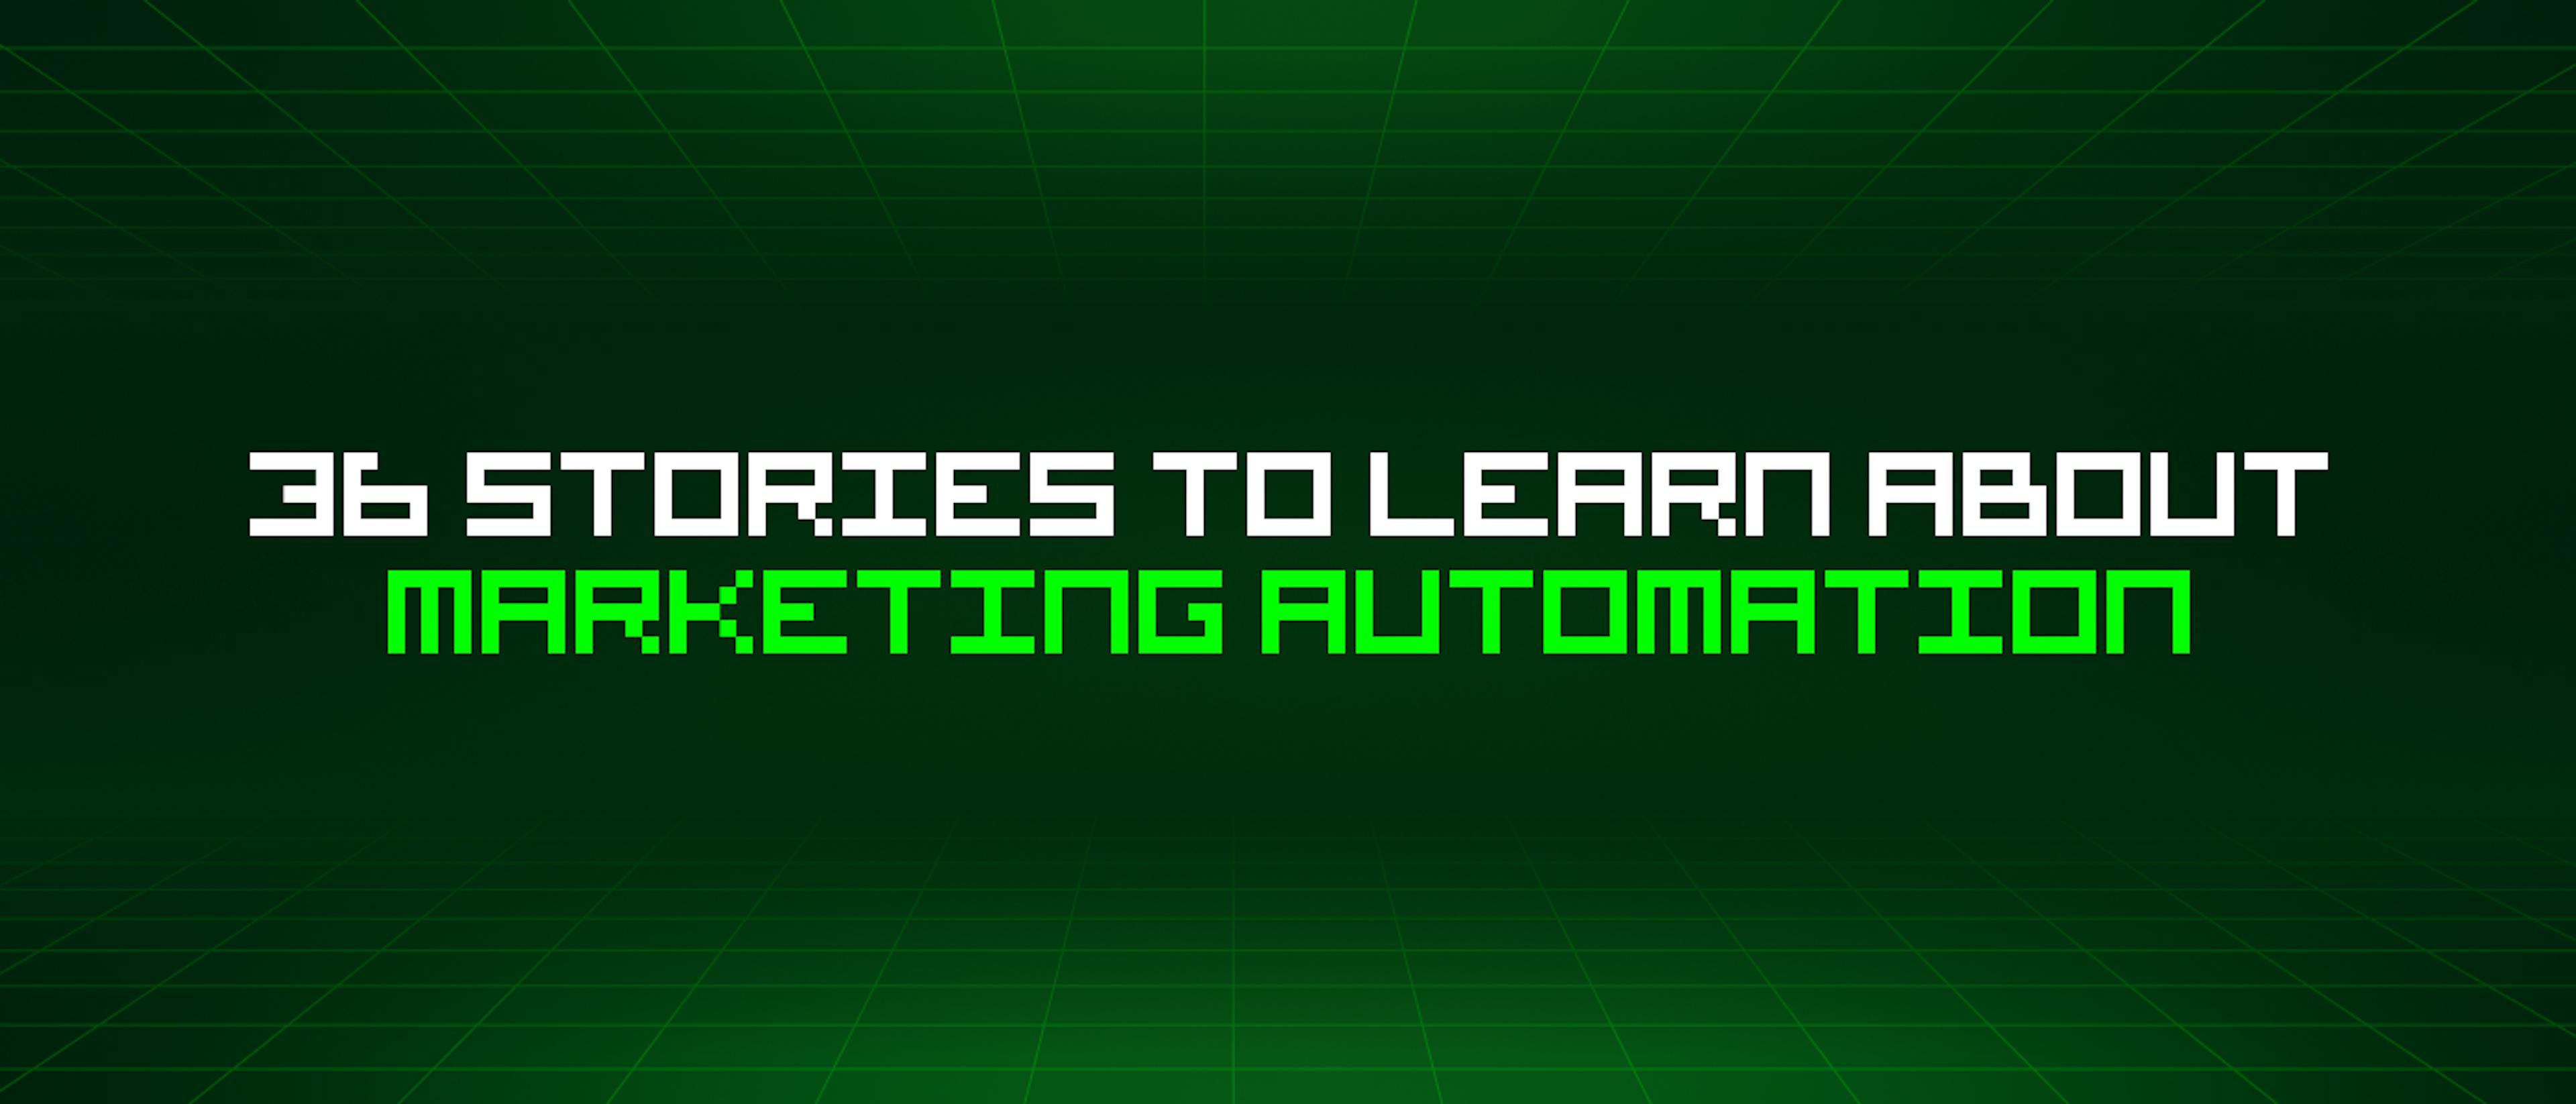 /36-stories-to-learn-about-marketing-automation feature image